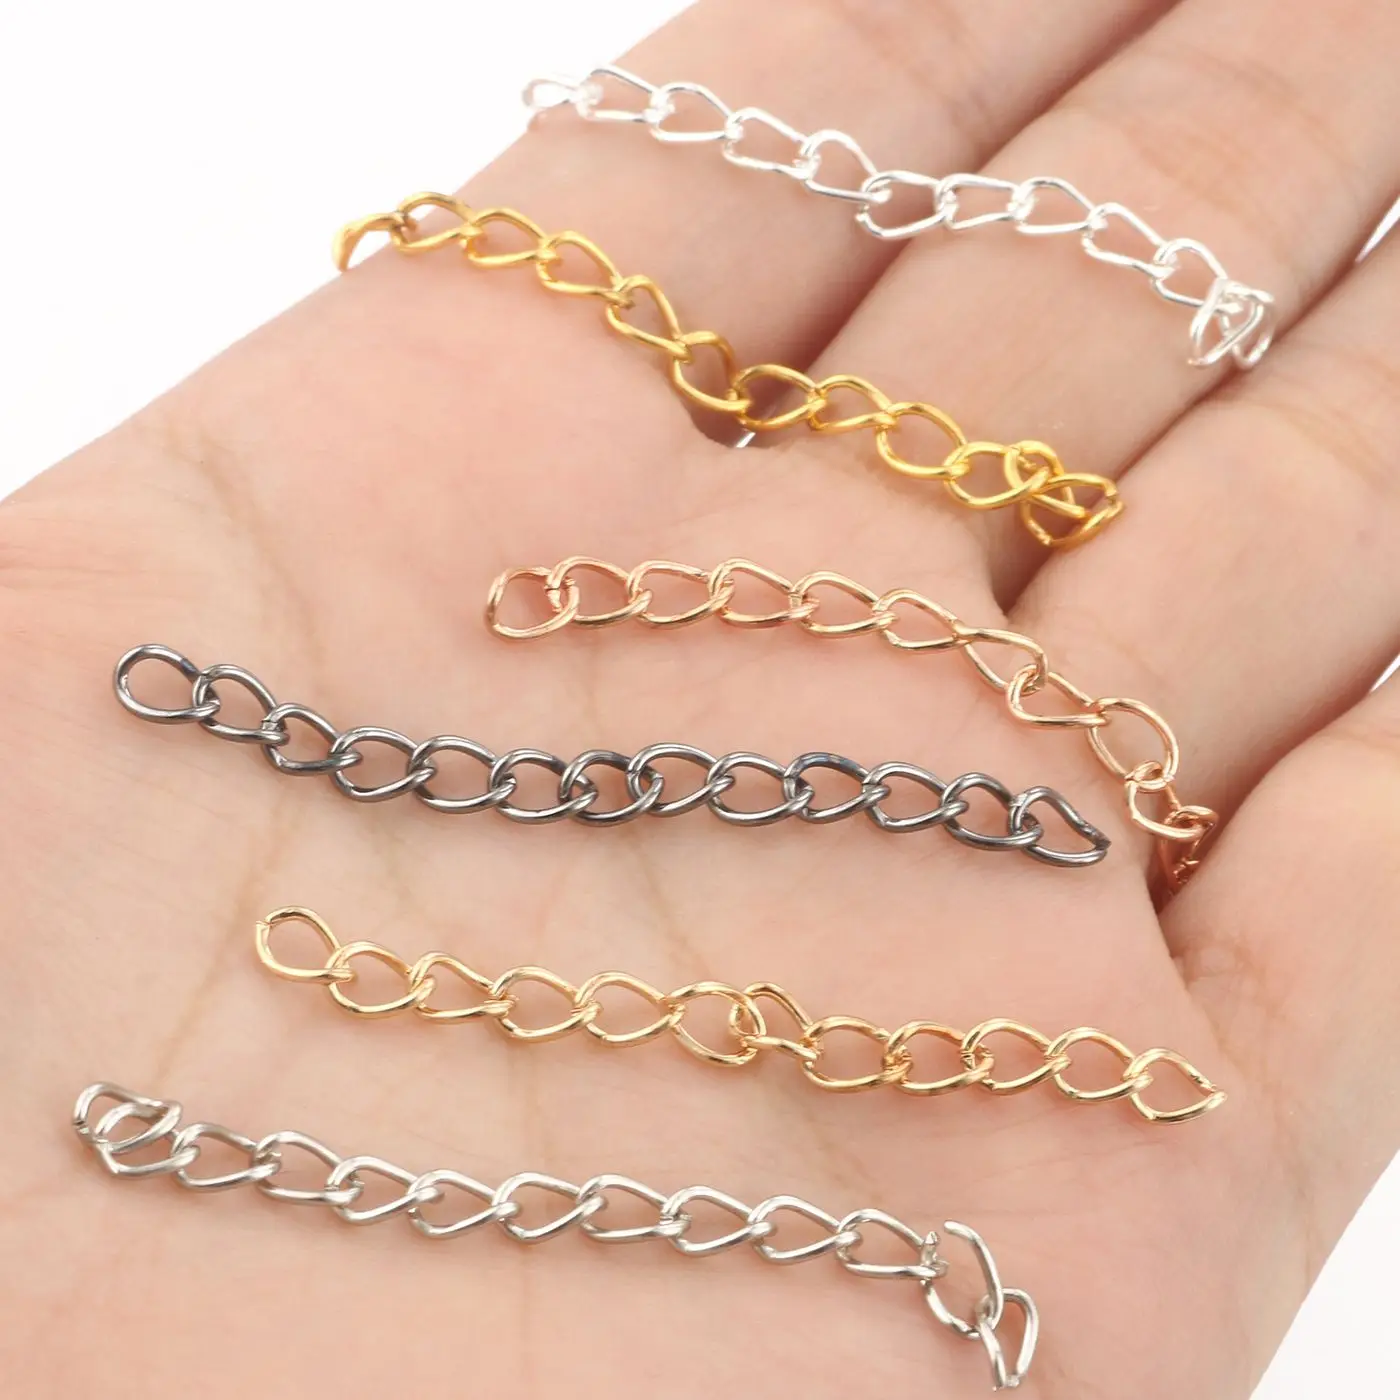 18k Yellow Gold Extender / Safety Chain Bracelet Necklace 2 X 4.5 in + 4  hookS